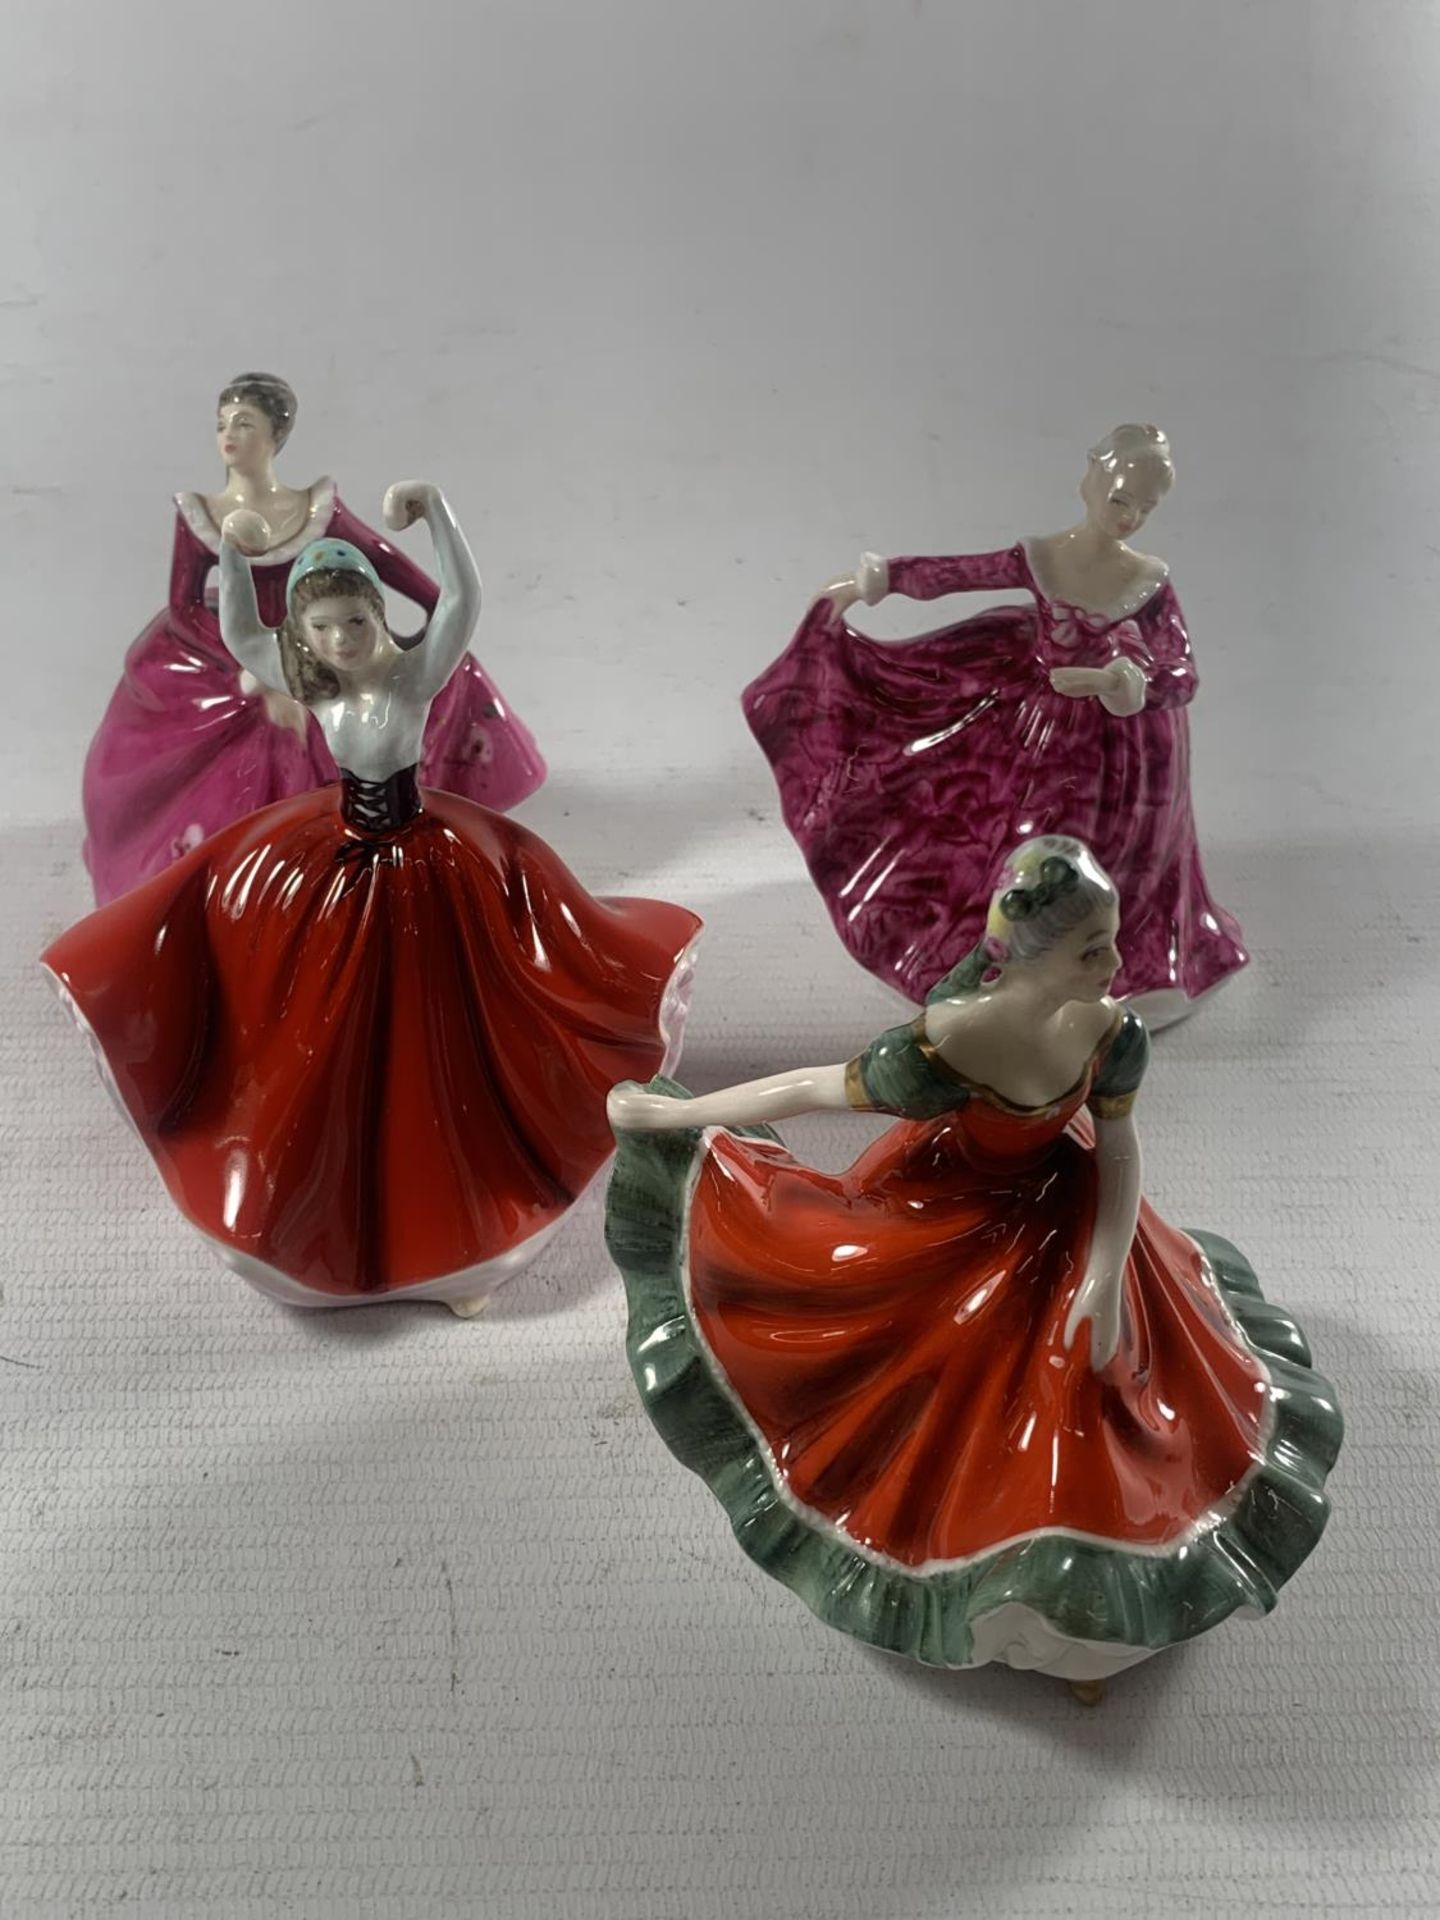 FOUR ROYAL DOULTON FIGURES TO INCLUDE KAREN, FRAGRANCE, KIRSTY, AND NINETTE